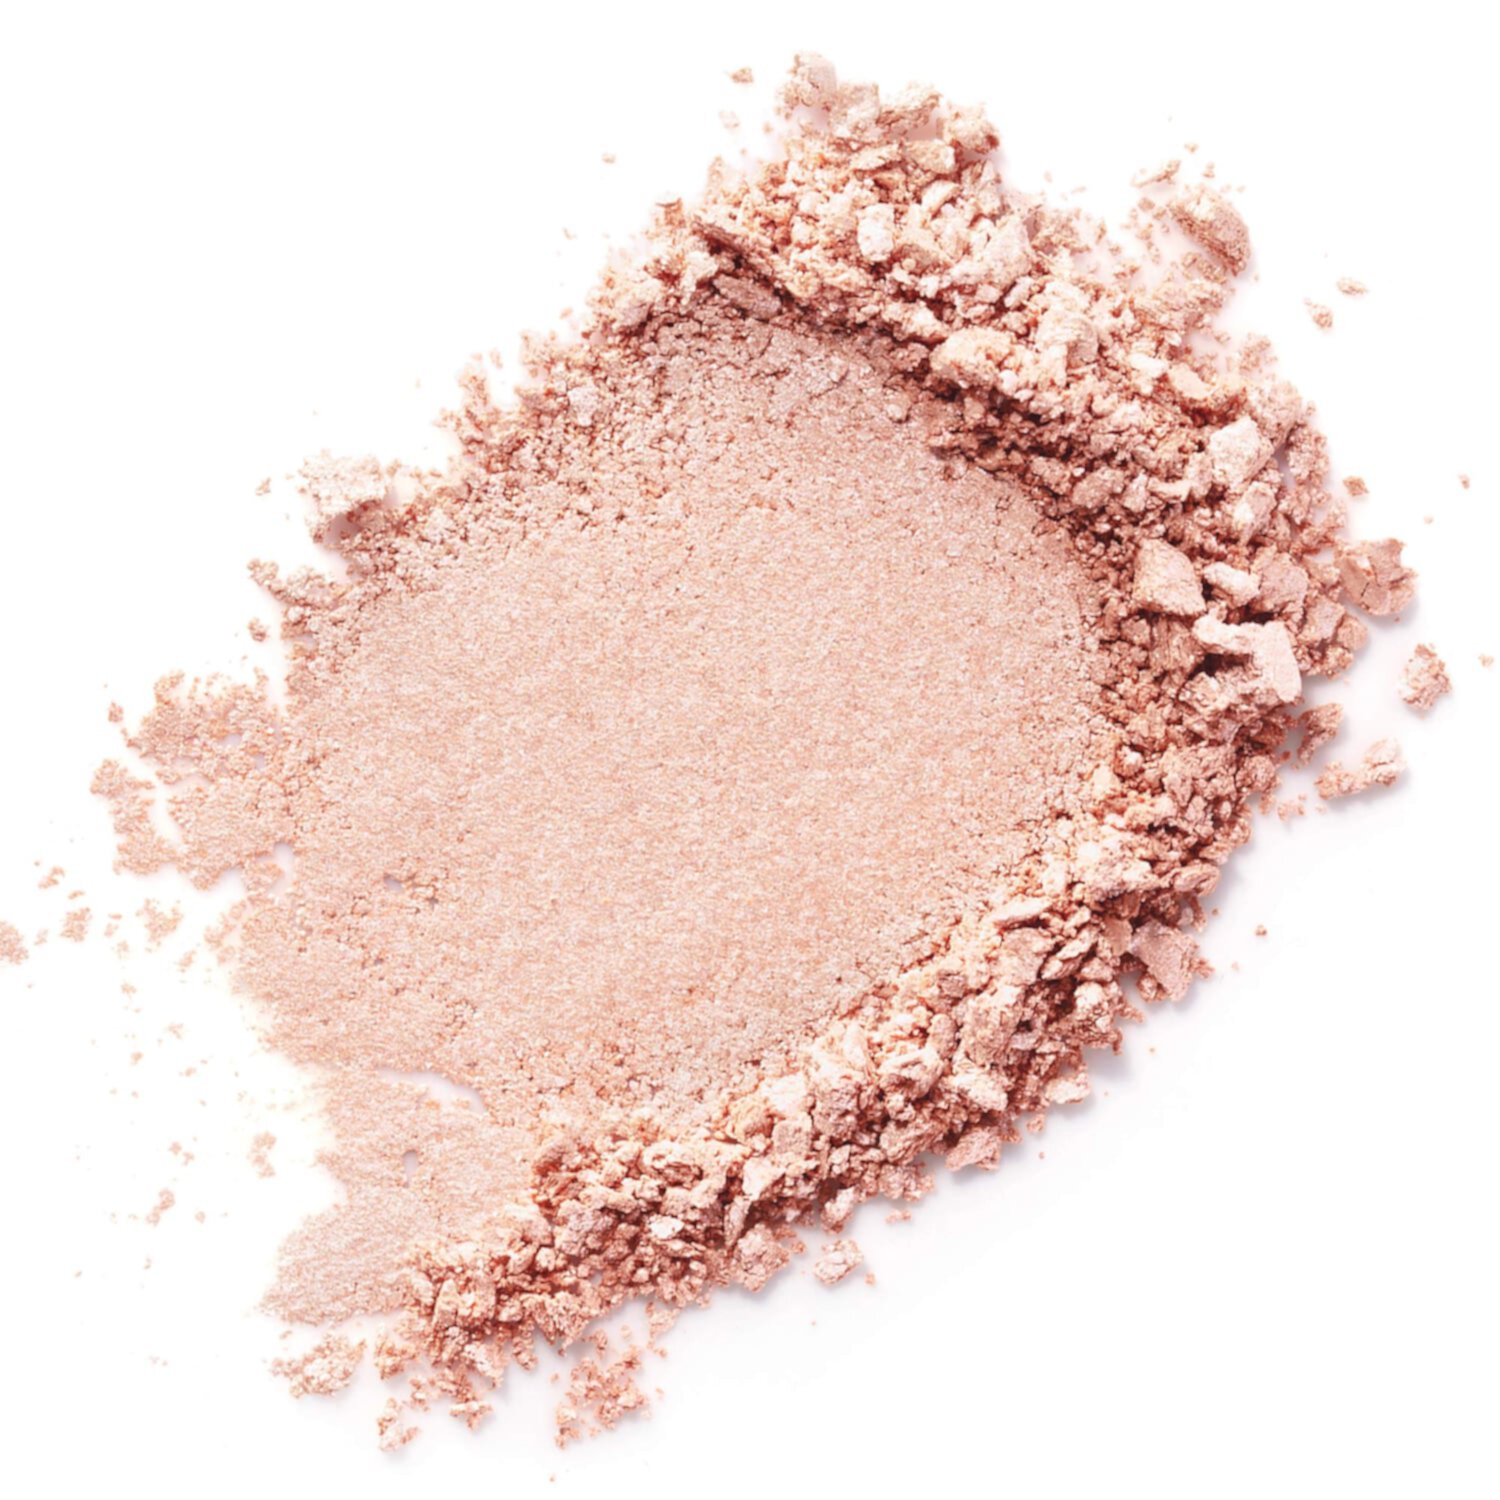 Cookie and Tickle Powder Highlighters Benefit Cosmetics